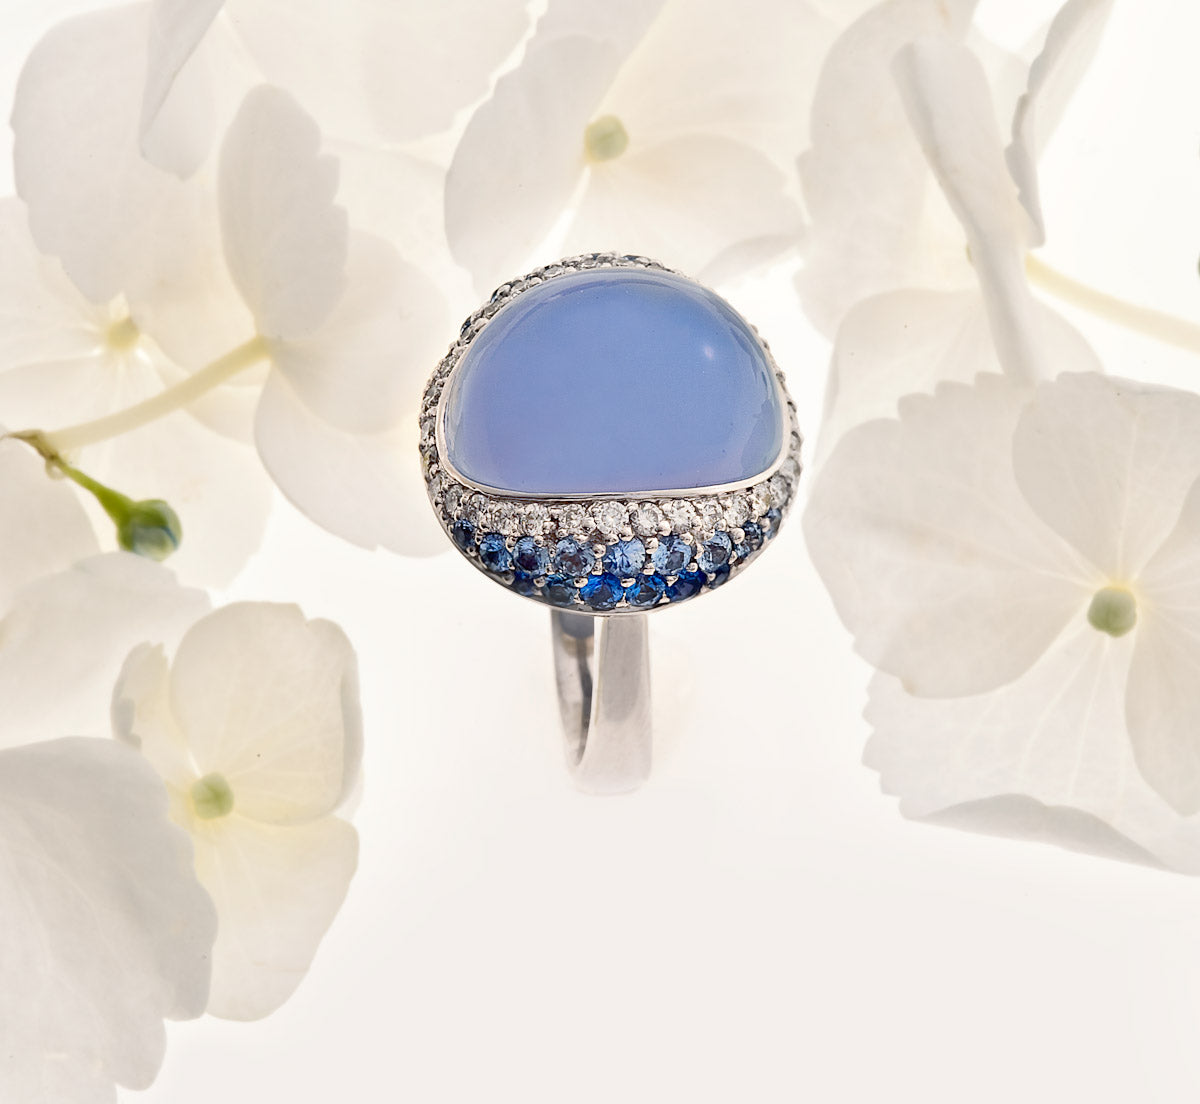 white gold cabochon-cut blue calcedony ring with pave set sapphires and diamonds